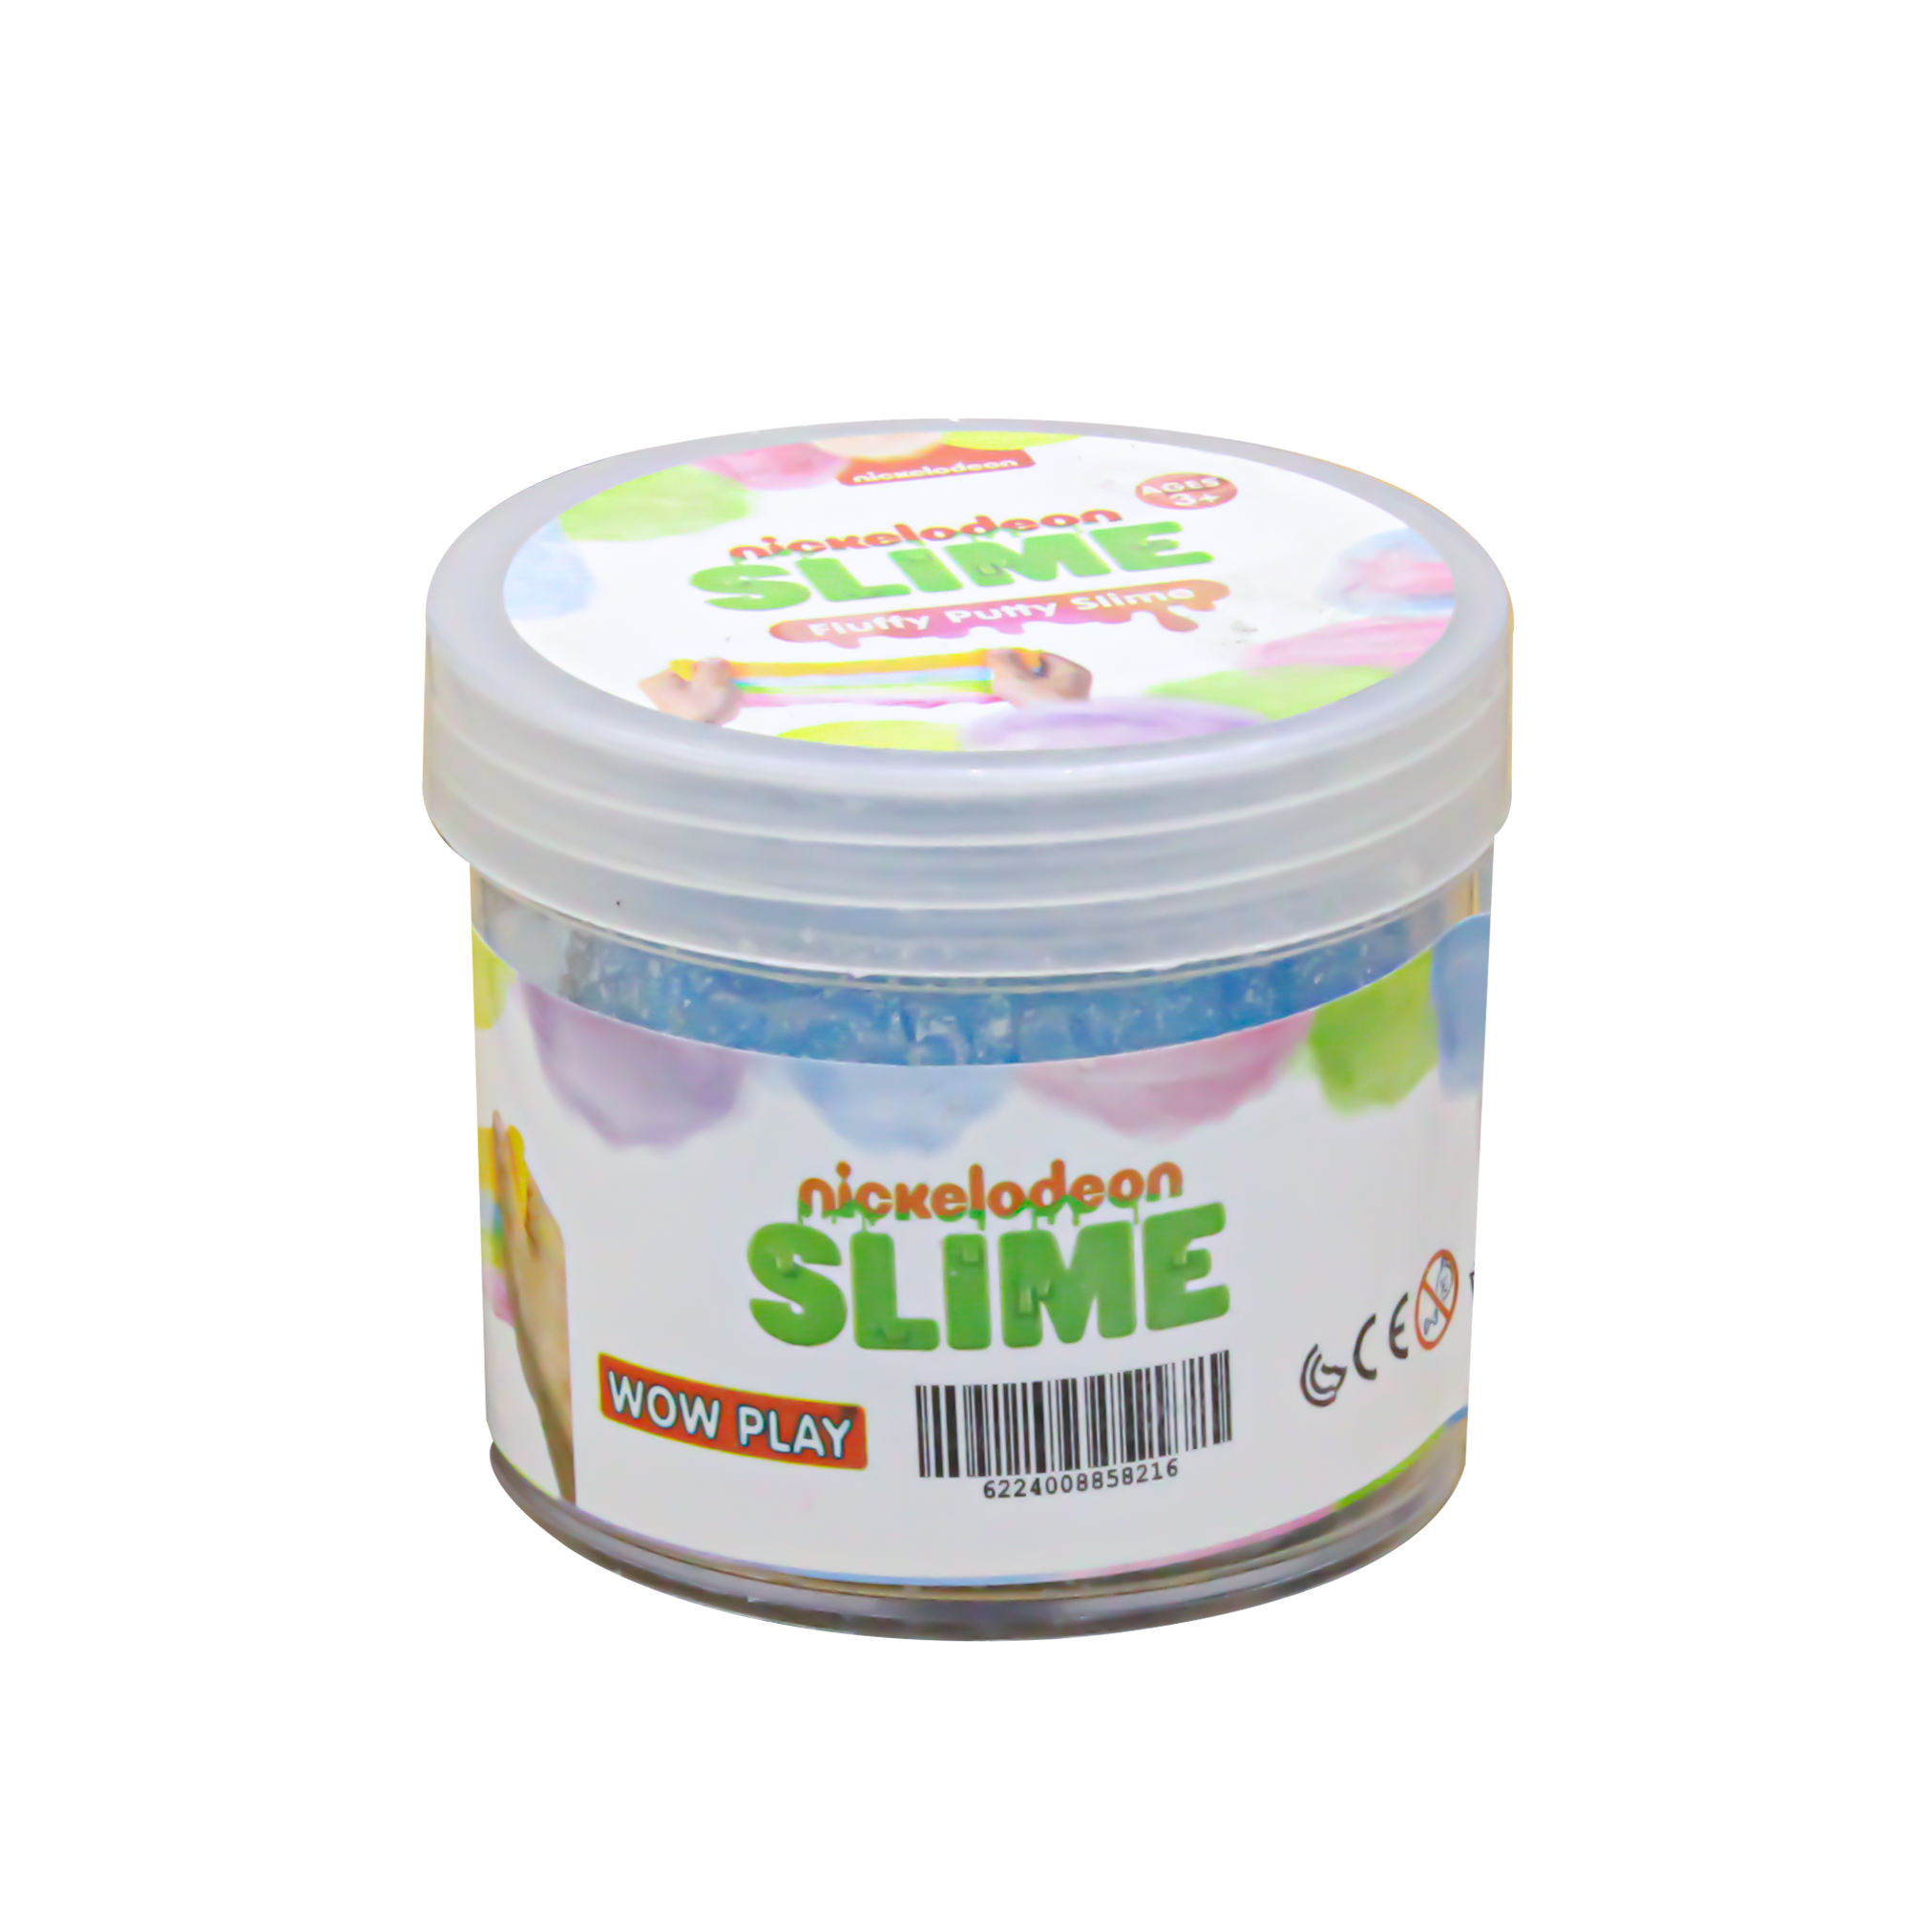 Wow Play Nickelodeon Slime Fluffy Putty Slime - Blue